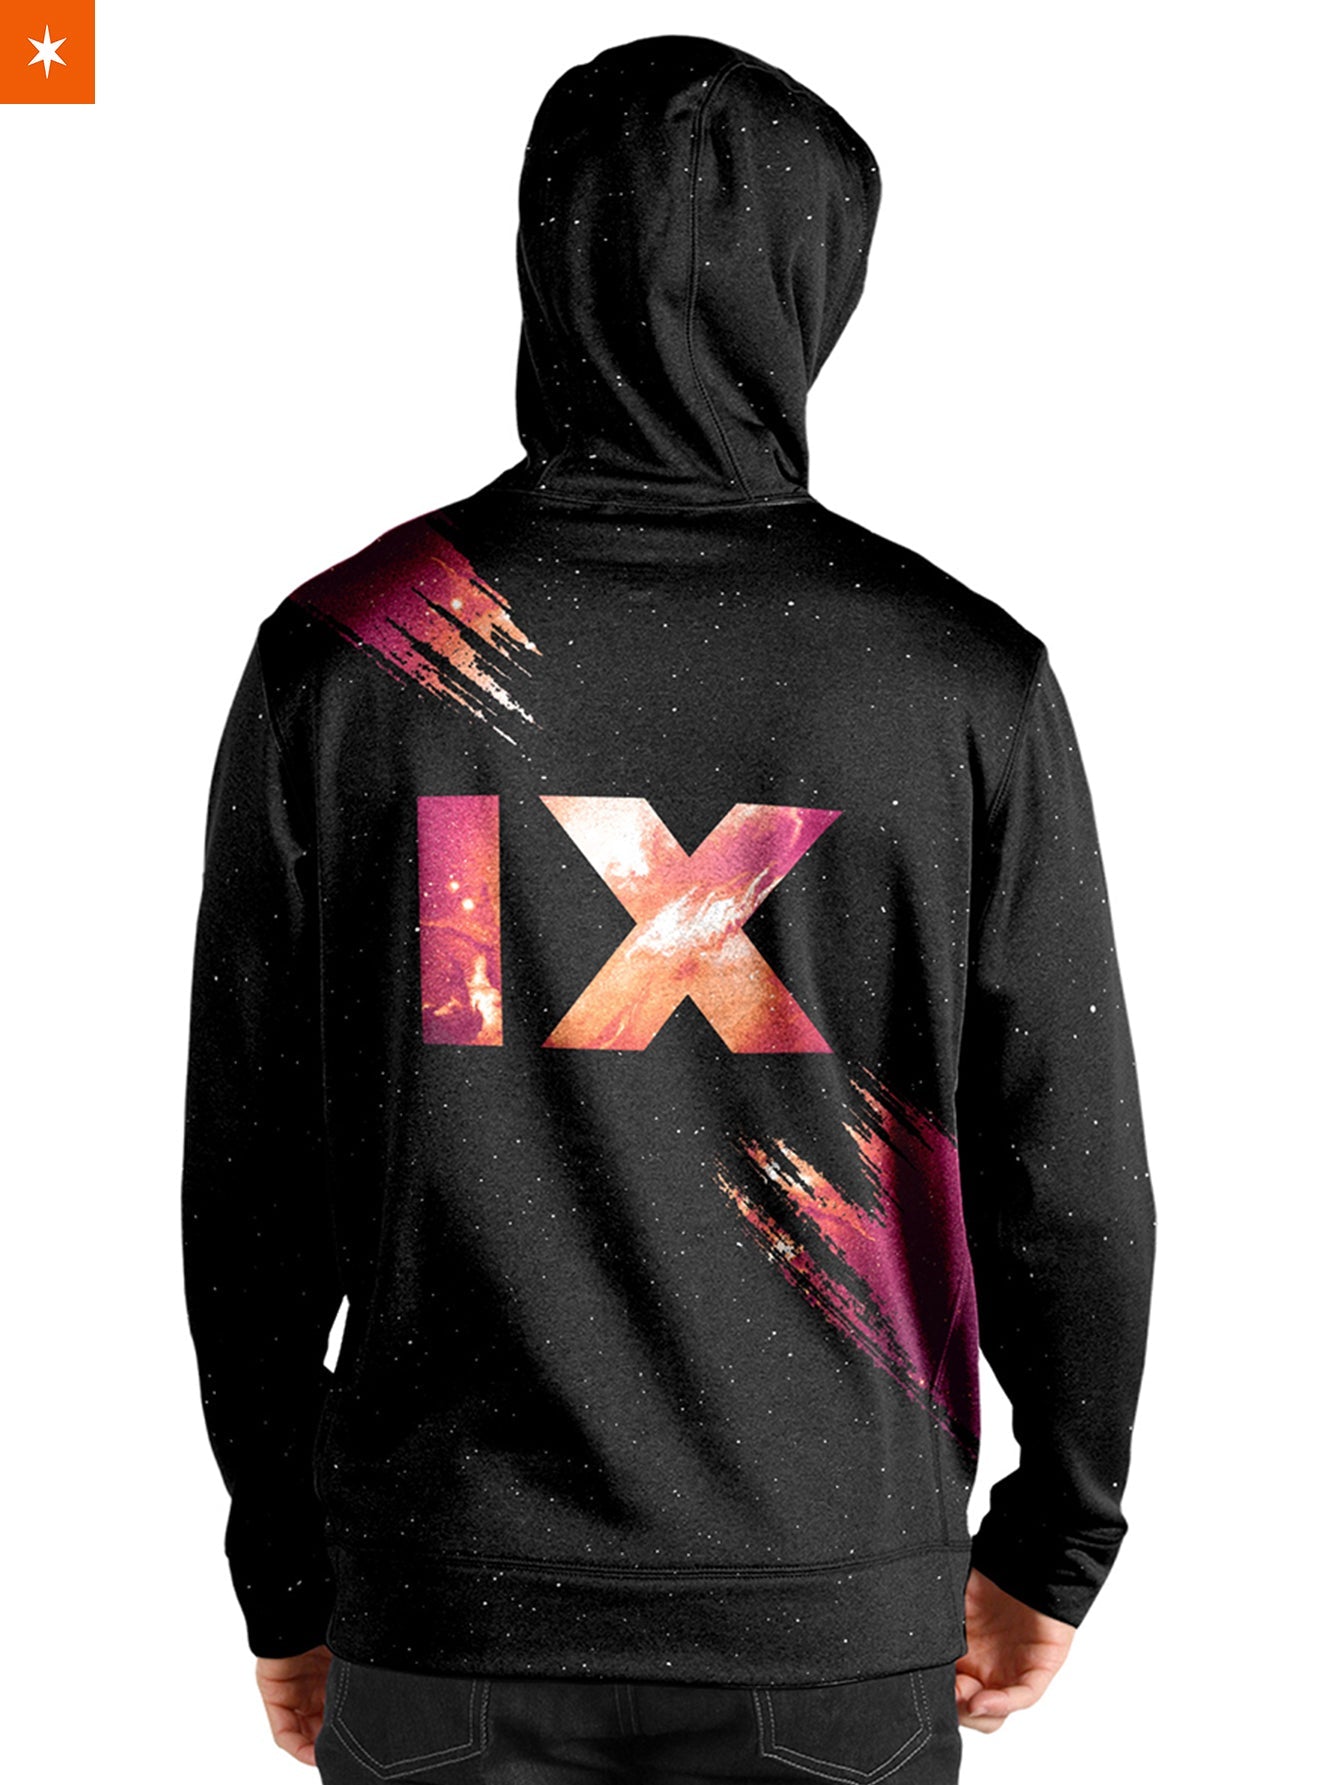 Fandomaniax - The Rise of Skywalker Unisex Pullover Hoodie